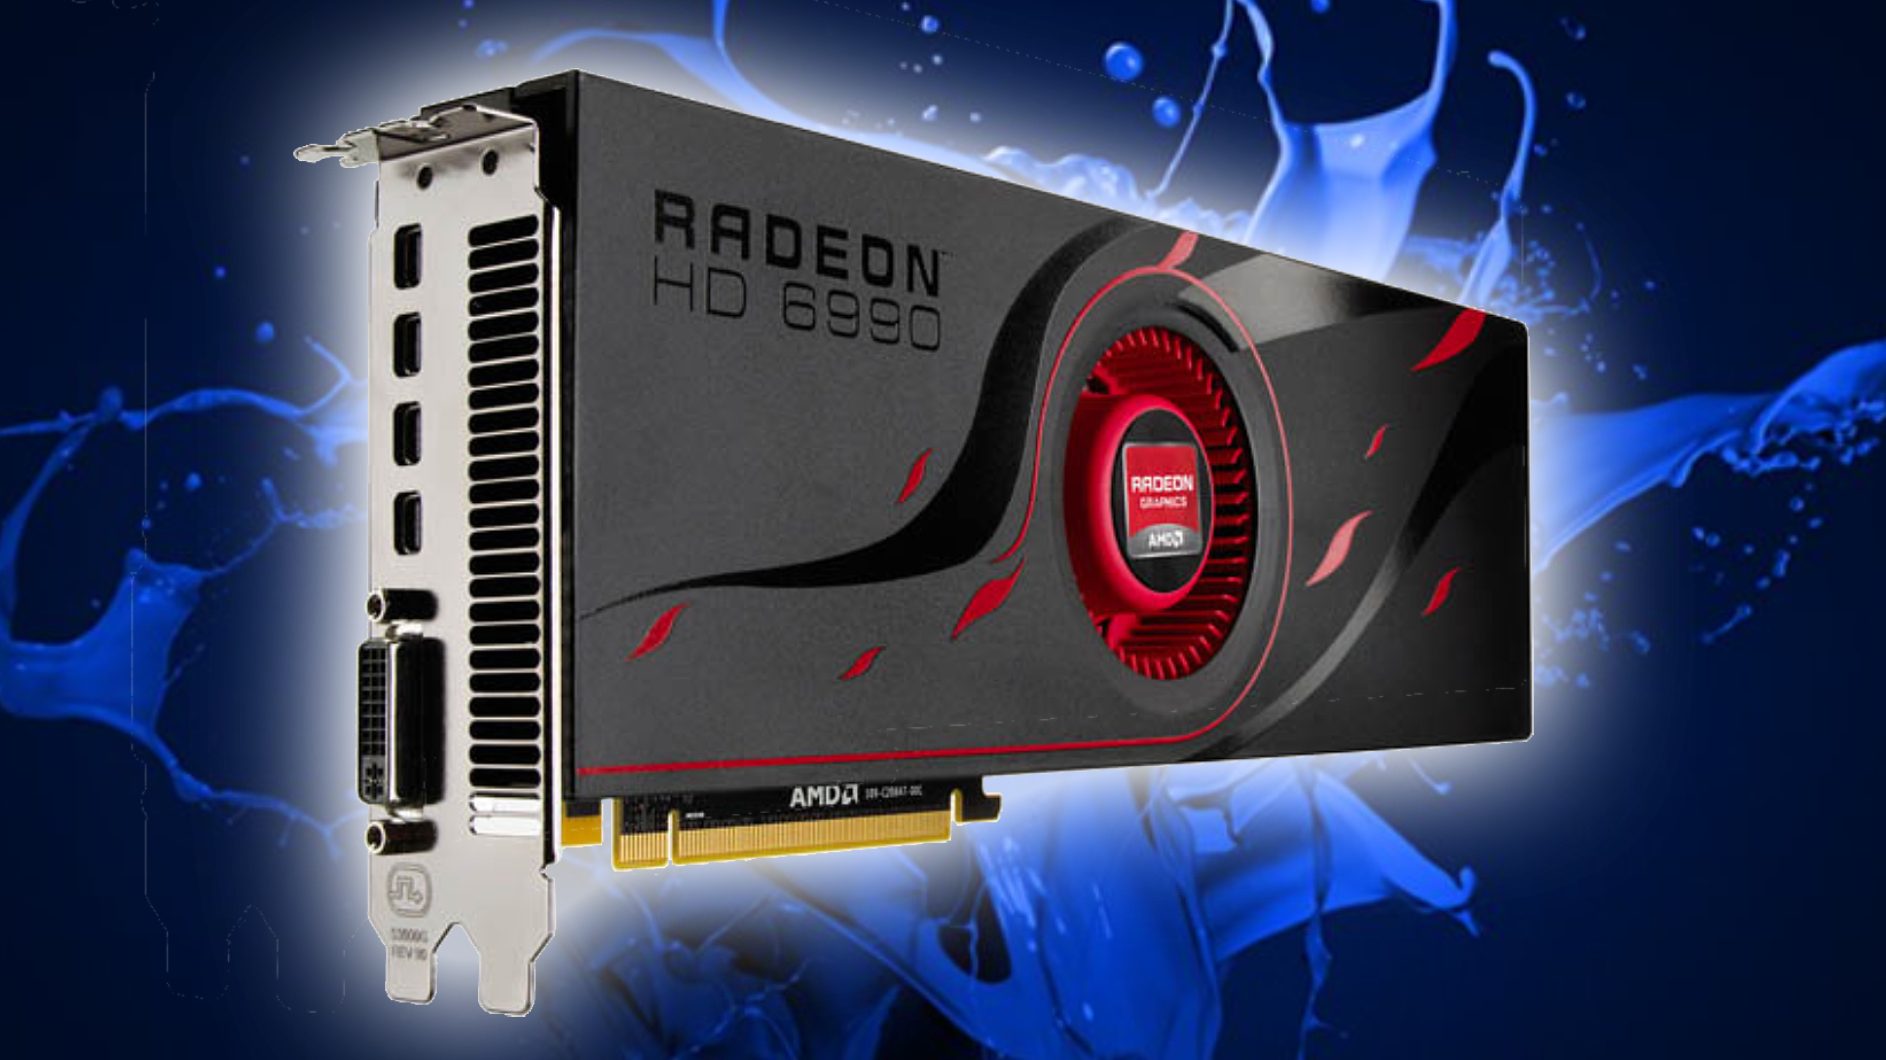 AMD Radeon HD 6990 Graphics Card Features and Specifications